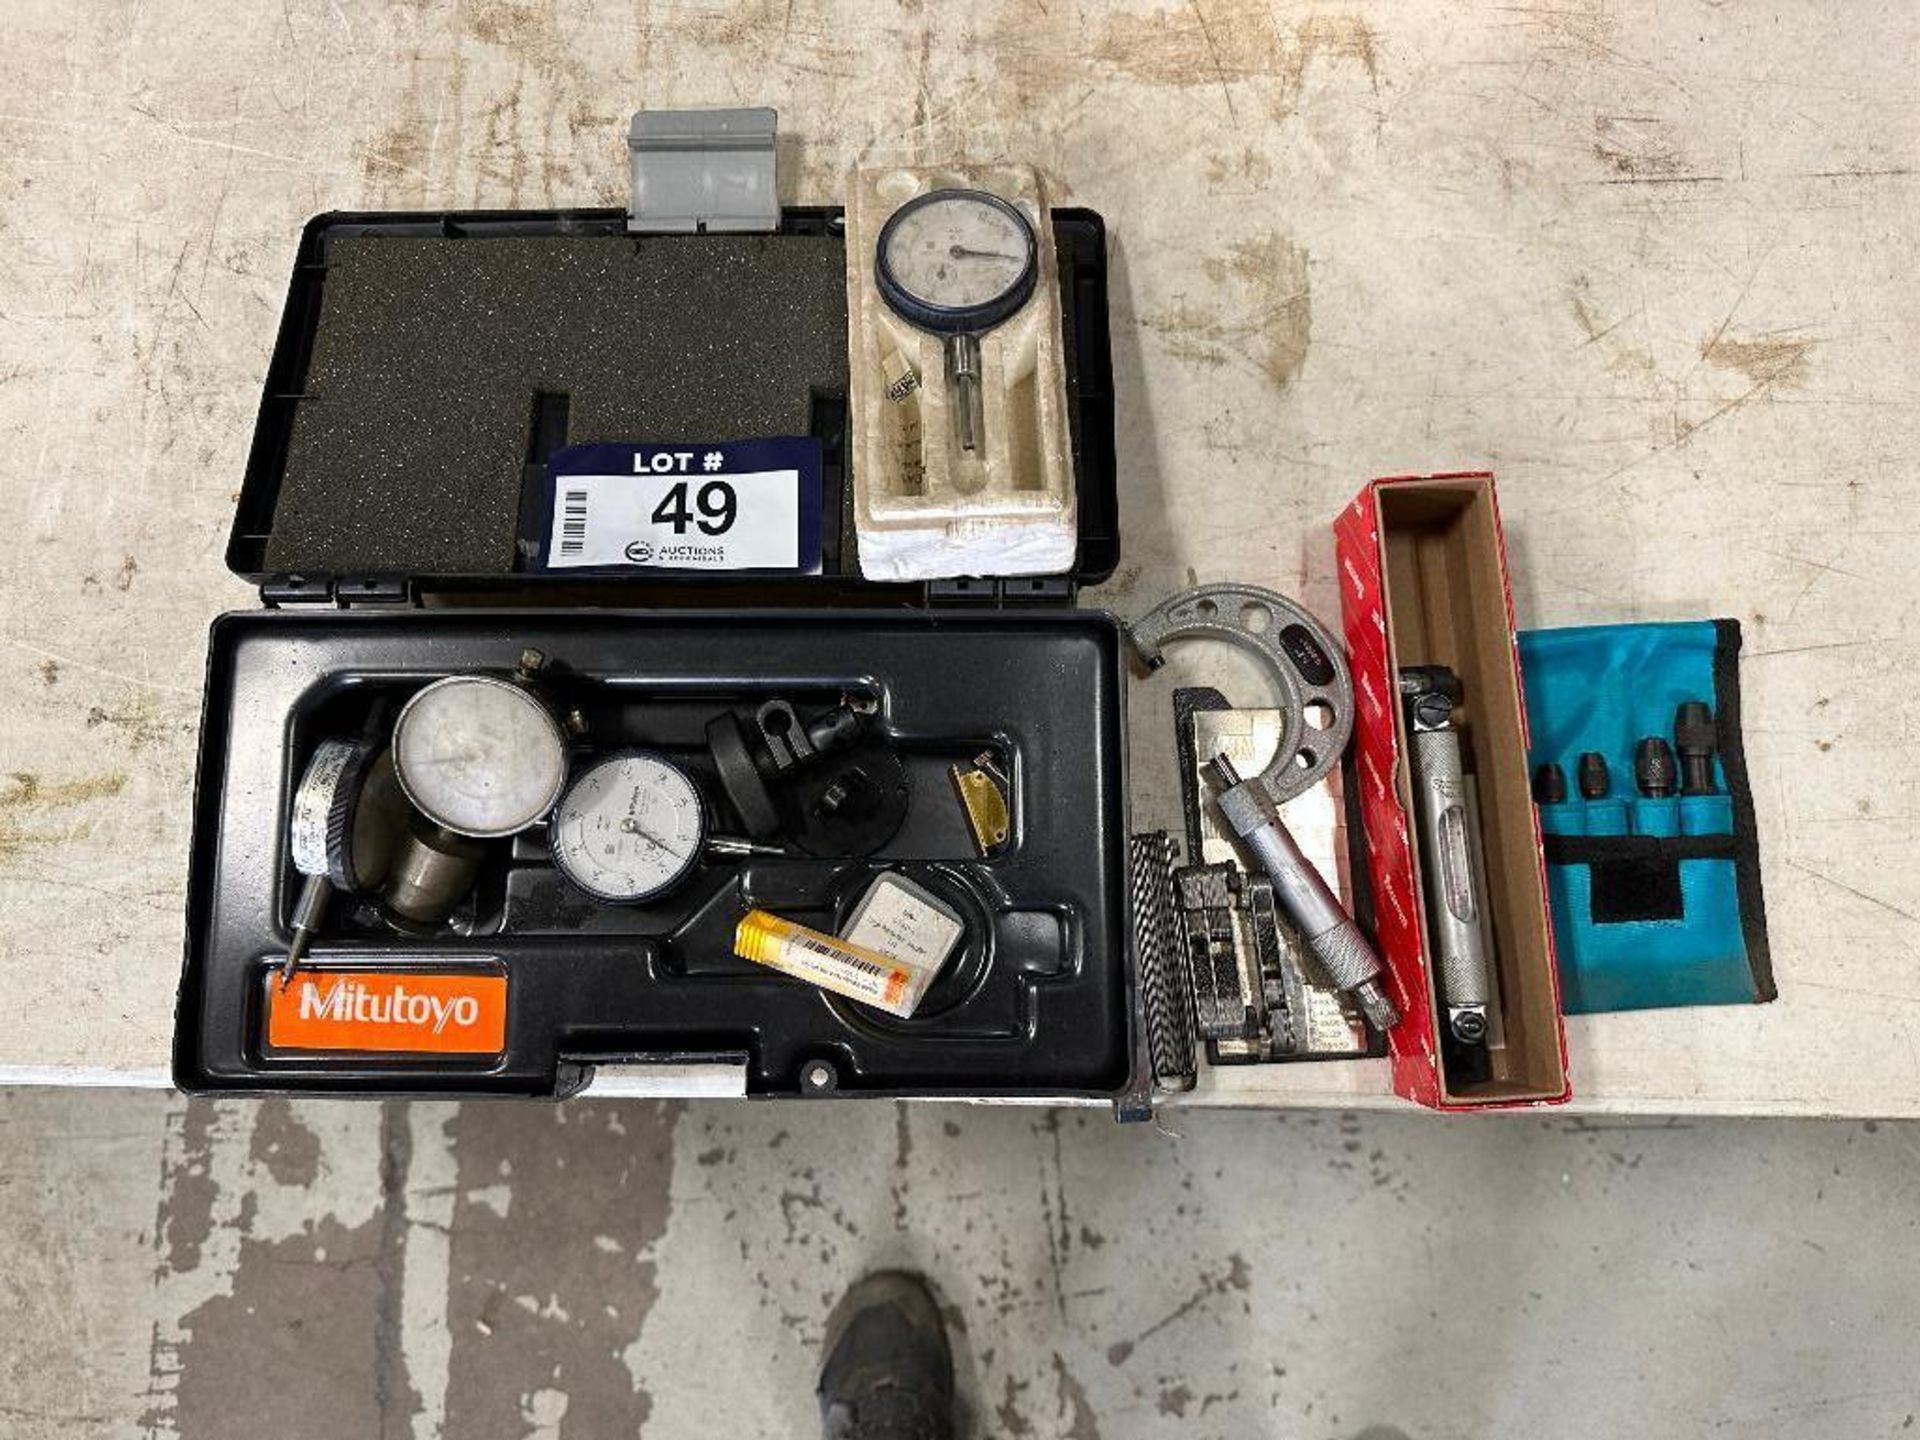 Lot of Asst. Gages, Dial Indicators, Shims, Pin Vise Set, etc. - Image 2 of 6